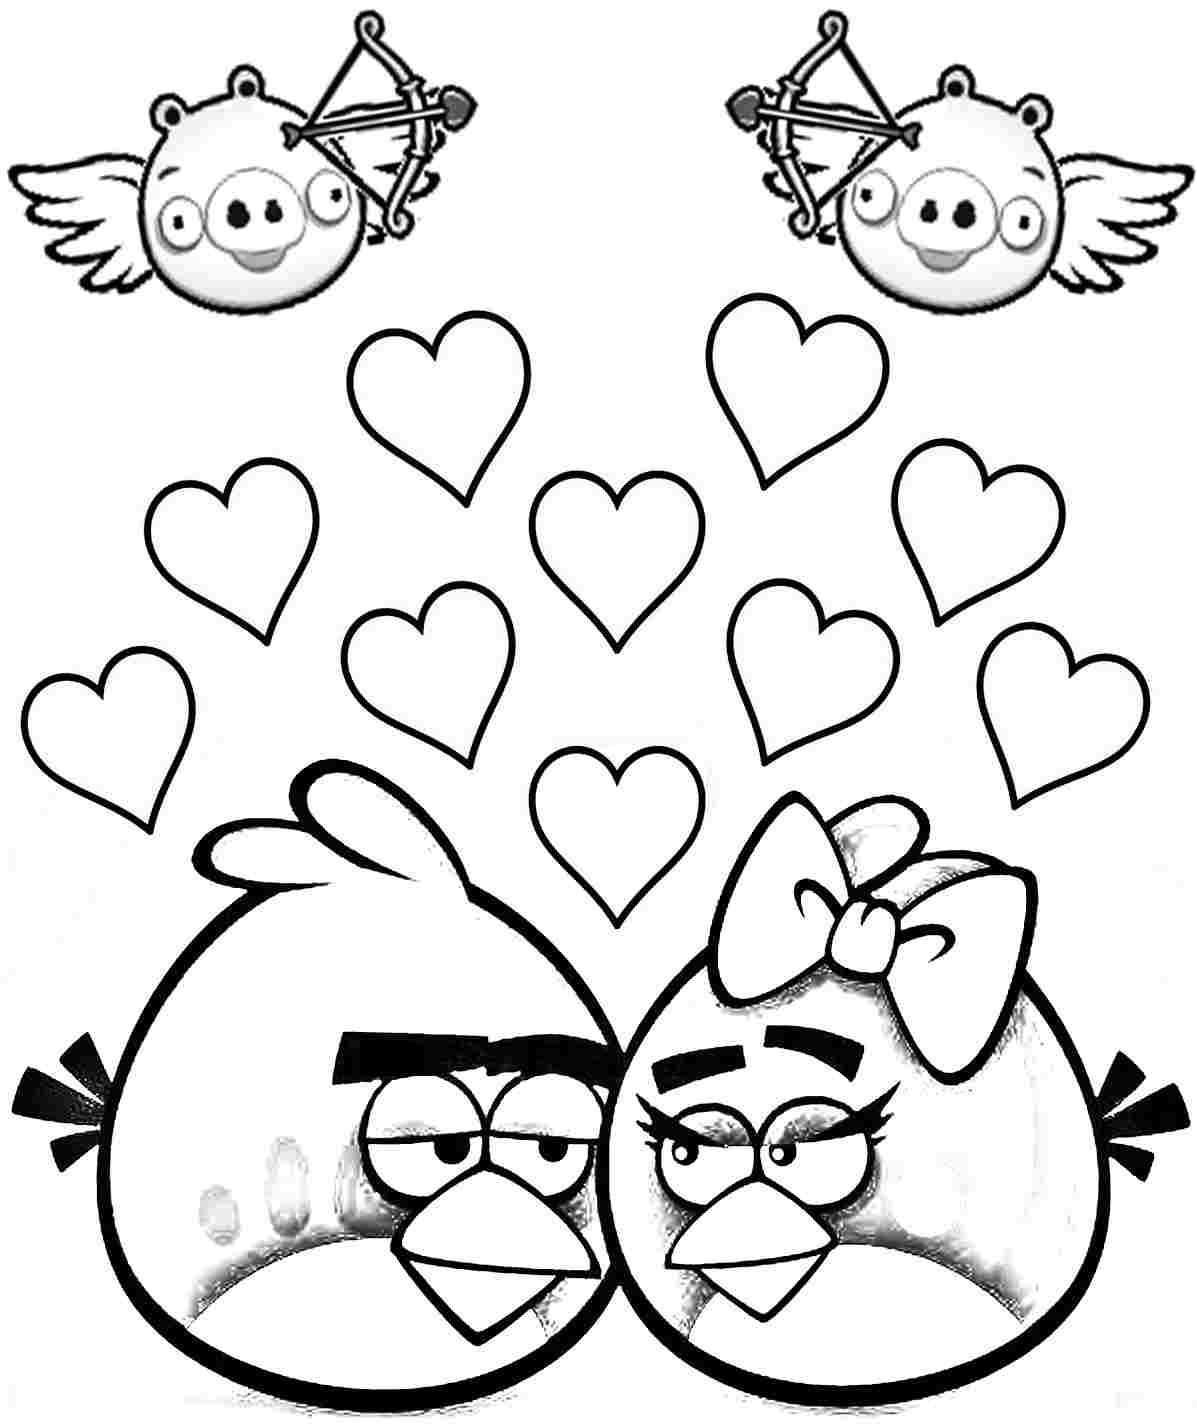 Boys Valentines Coloring Pages
 Valentines Day Coloring Pages For Boys at GetColorings